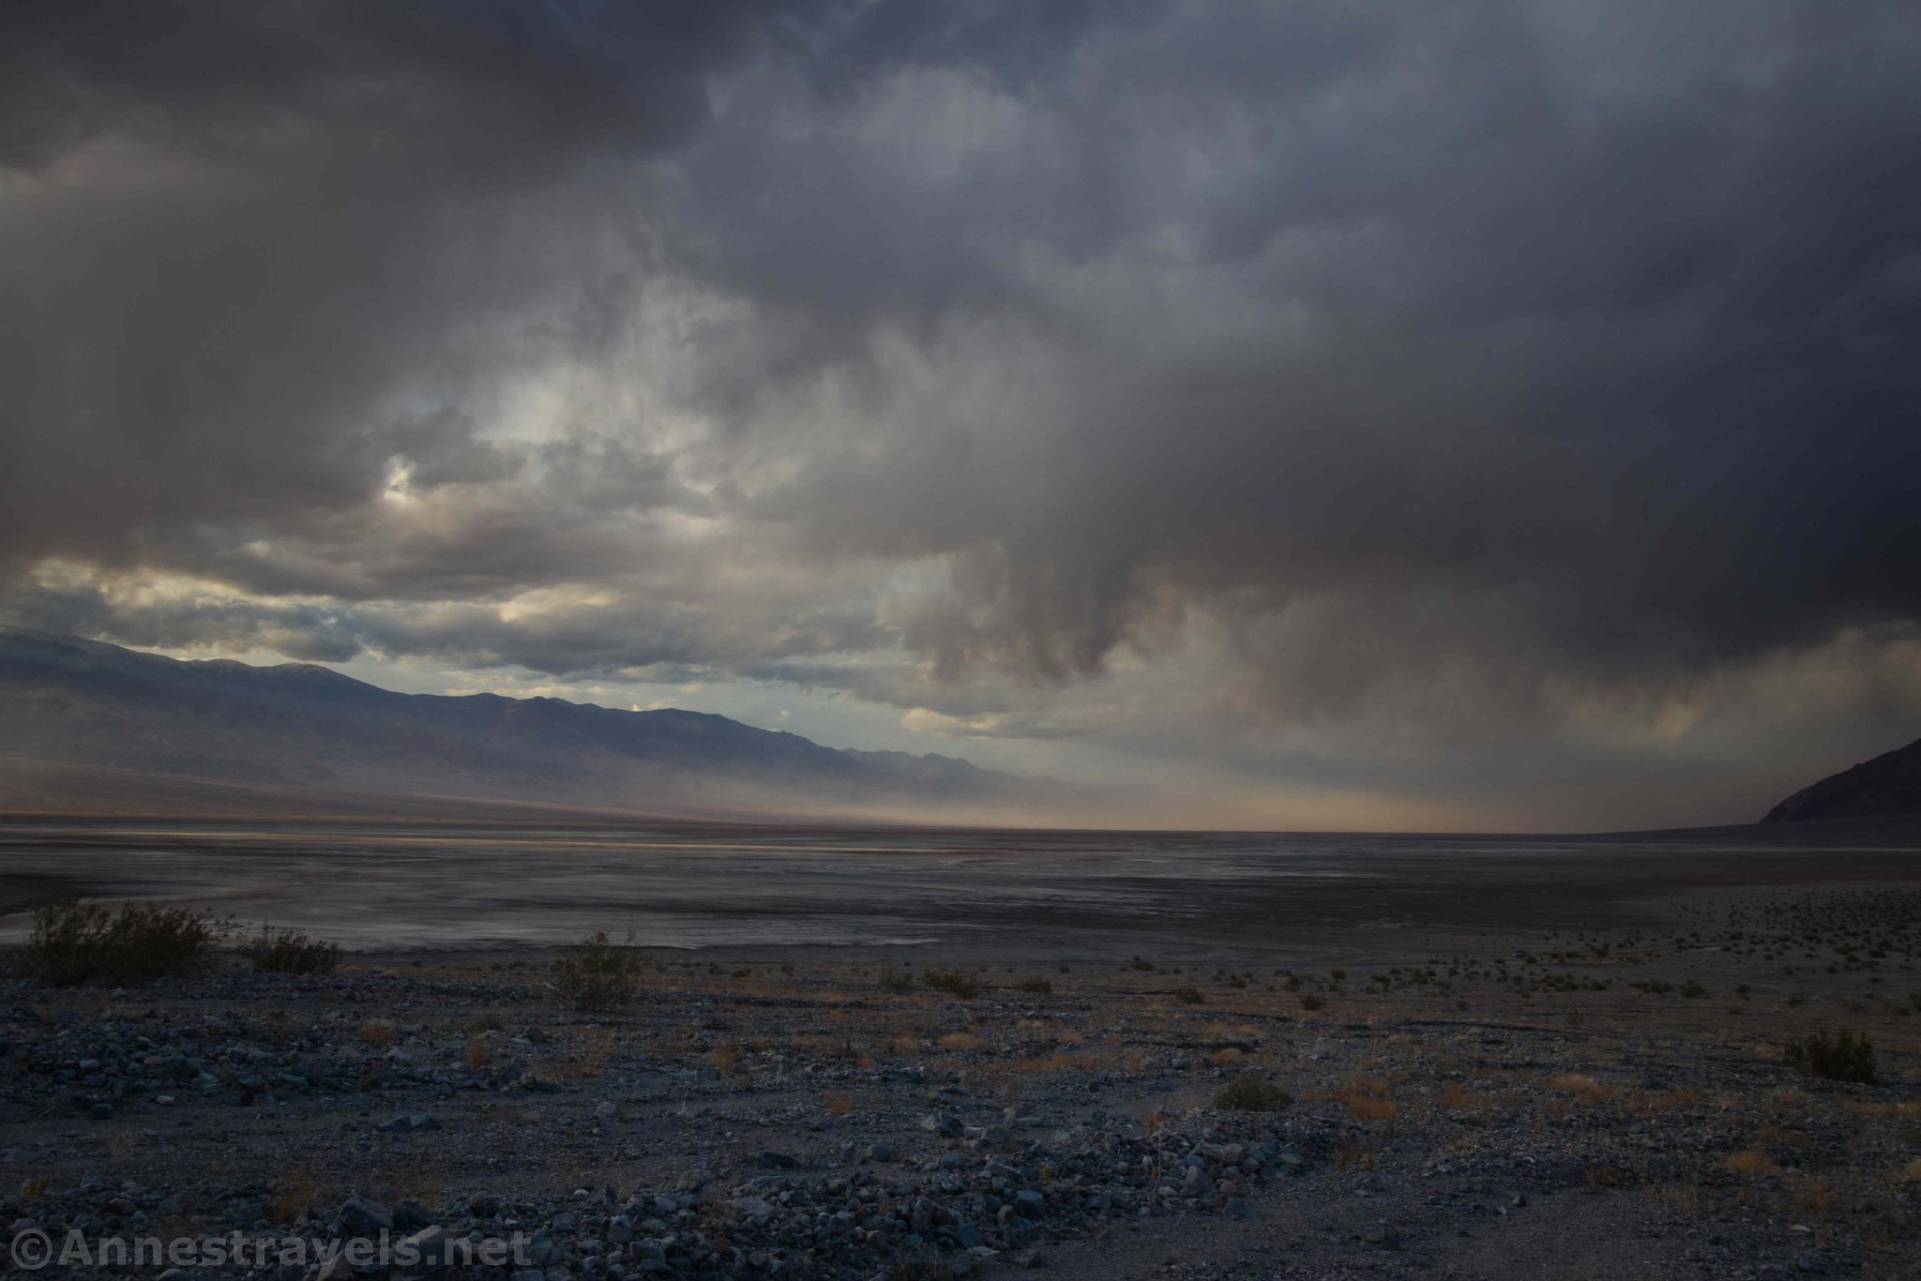 A storm over Death Valley from below Sidewinder Canyon, Death Valley National Park, California